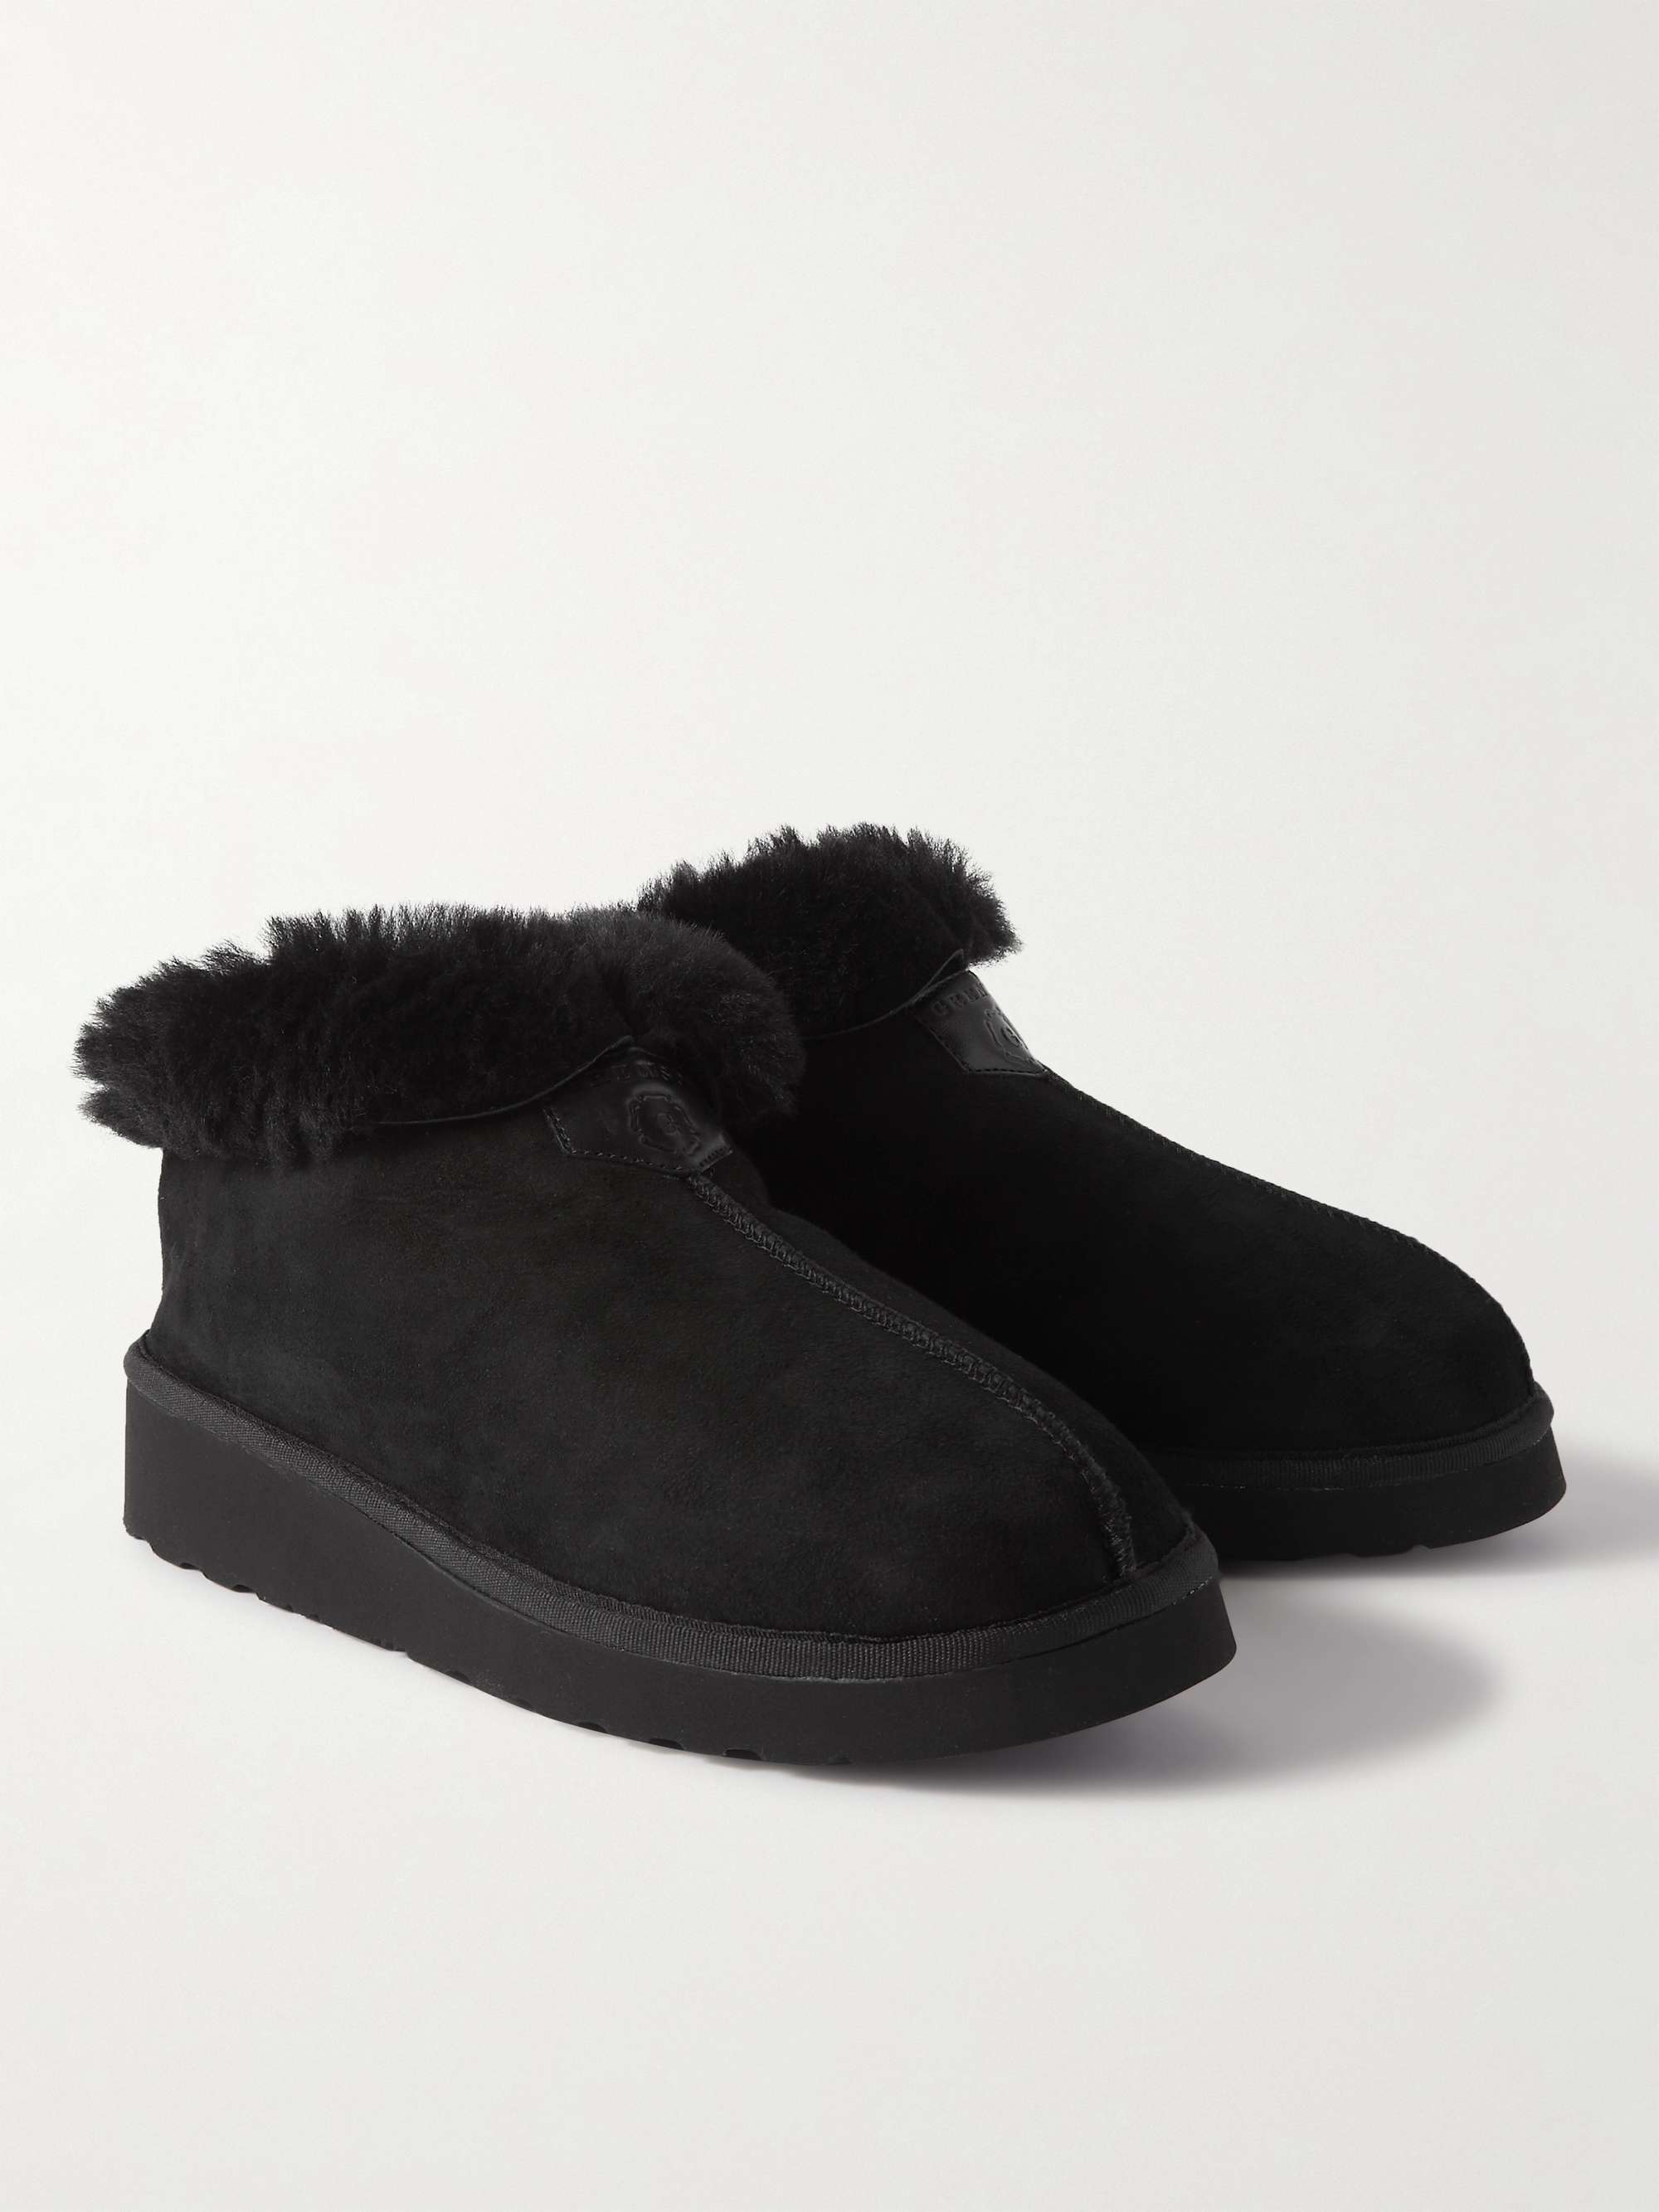 GRENSON Wyeth Shearling-Lined Suede Slippers